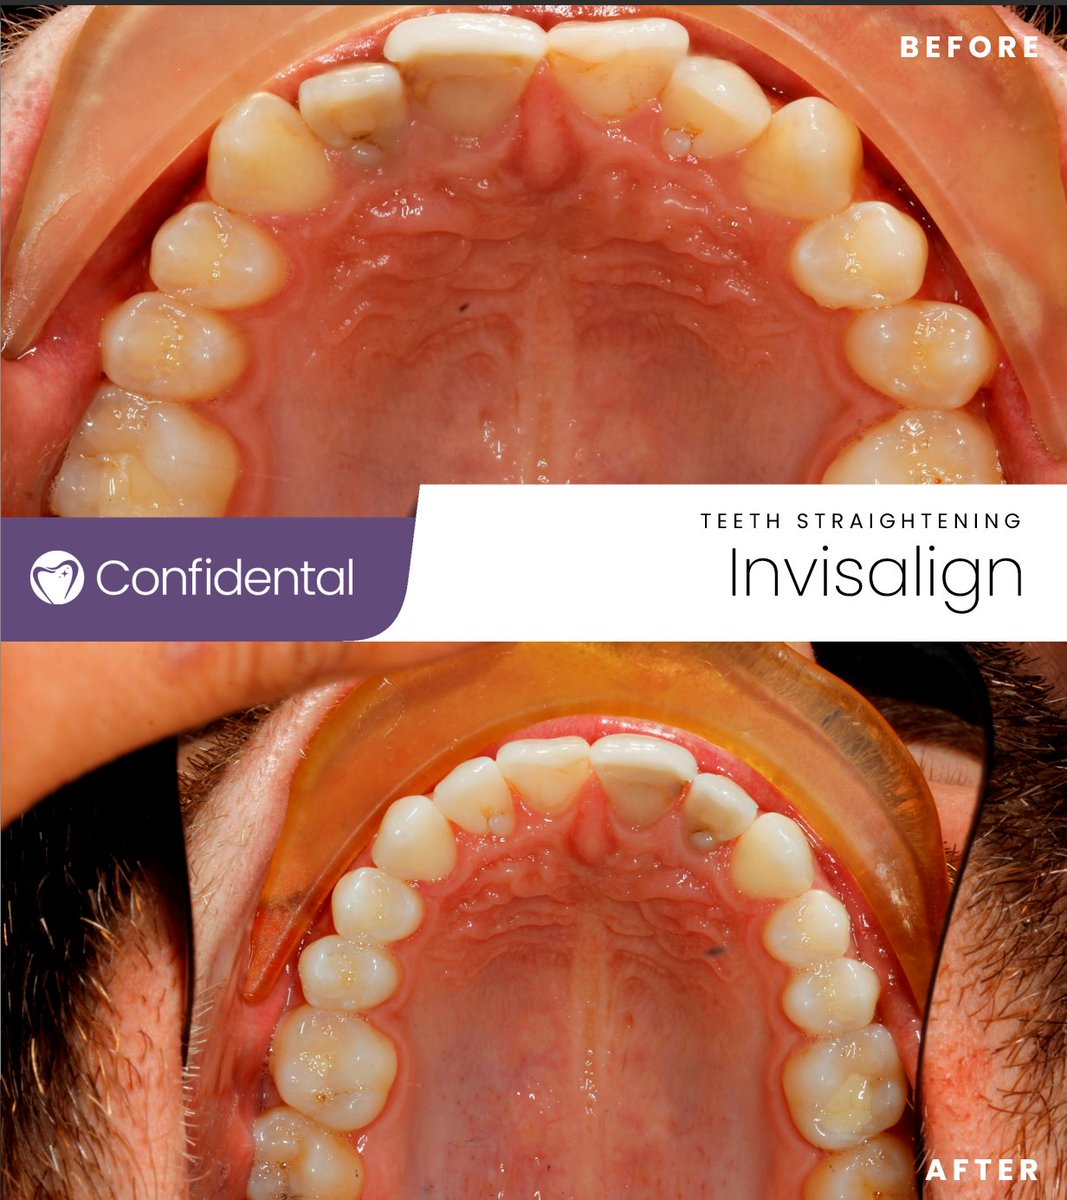 📣 Check out this incredible transformation! 😍✨ Schedule your FREE consultation today with our smile advisor today so you too can have a similar change #InvisalignTransformation #BeforeAndAfter #SmileMakeover #ConfidenceBoost #InvisibleAligners #StraightTeeth #NewSmileJourney